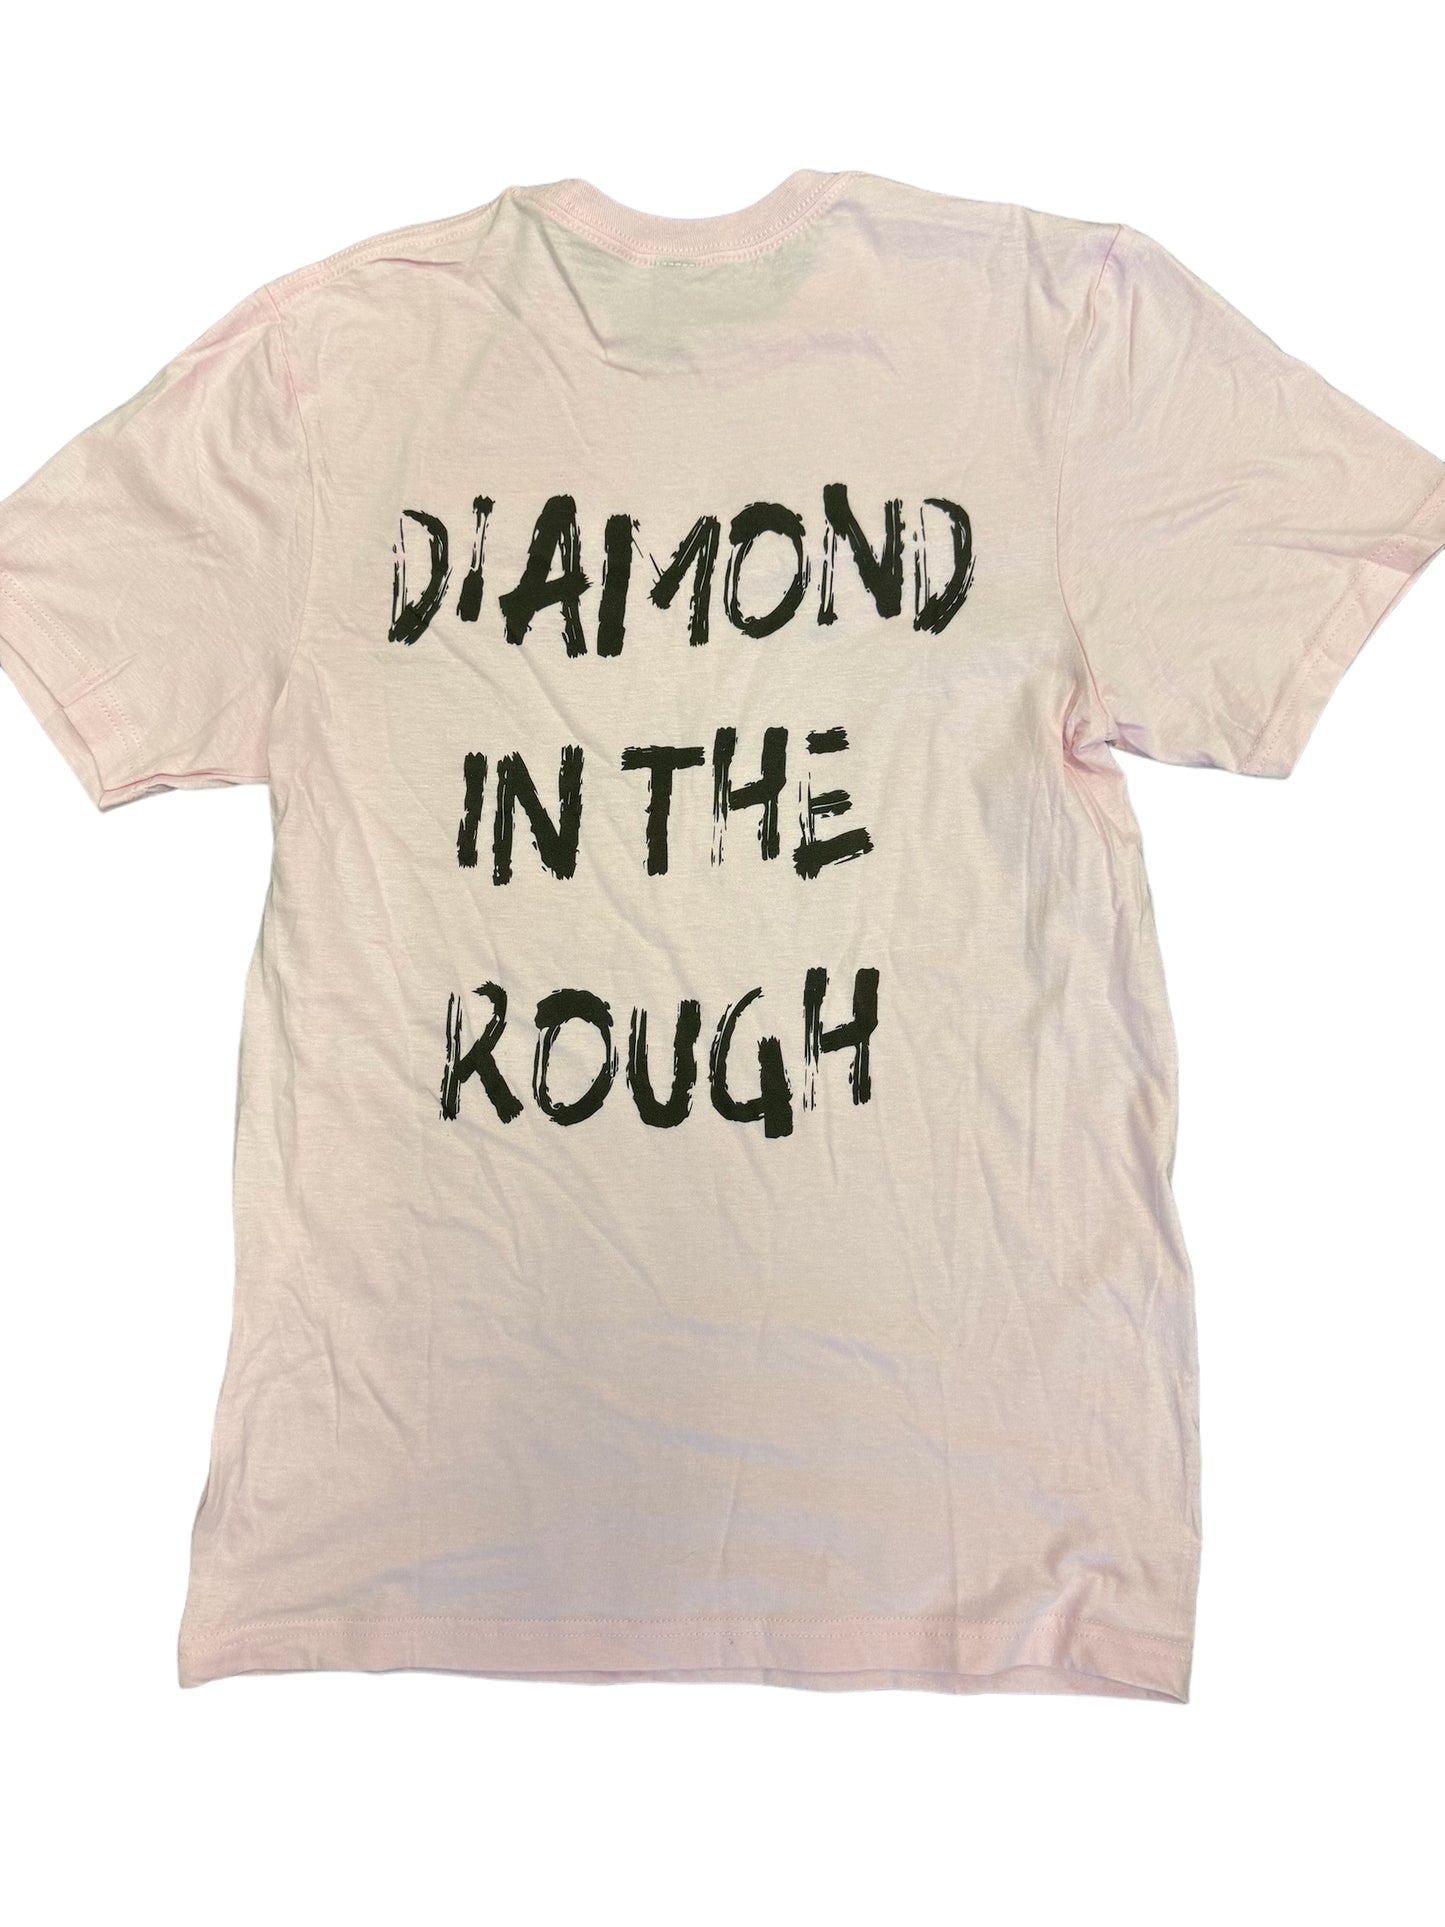 Diamond In The Rough Blinged Tee